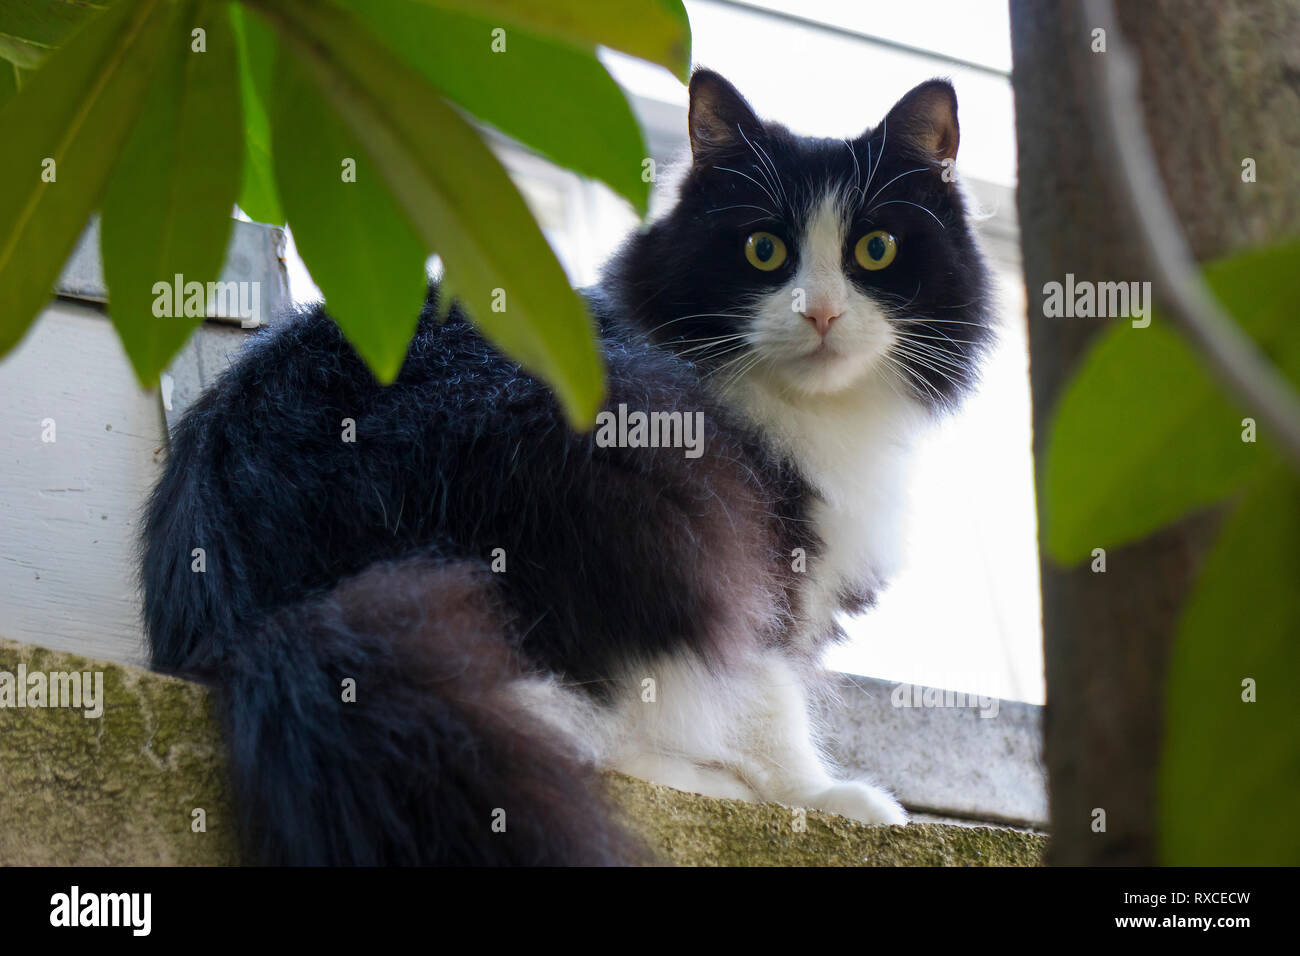 Black and white long haired pet cat sitting on a wall Stock Photo